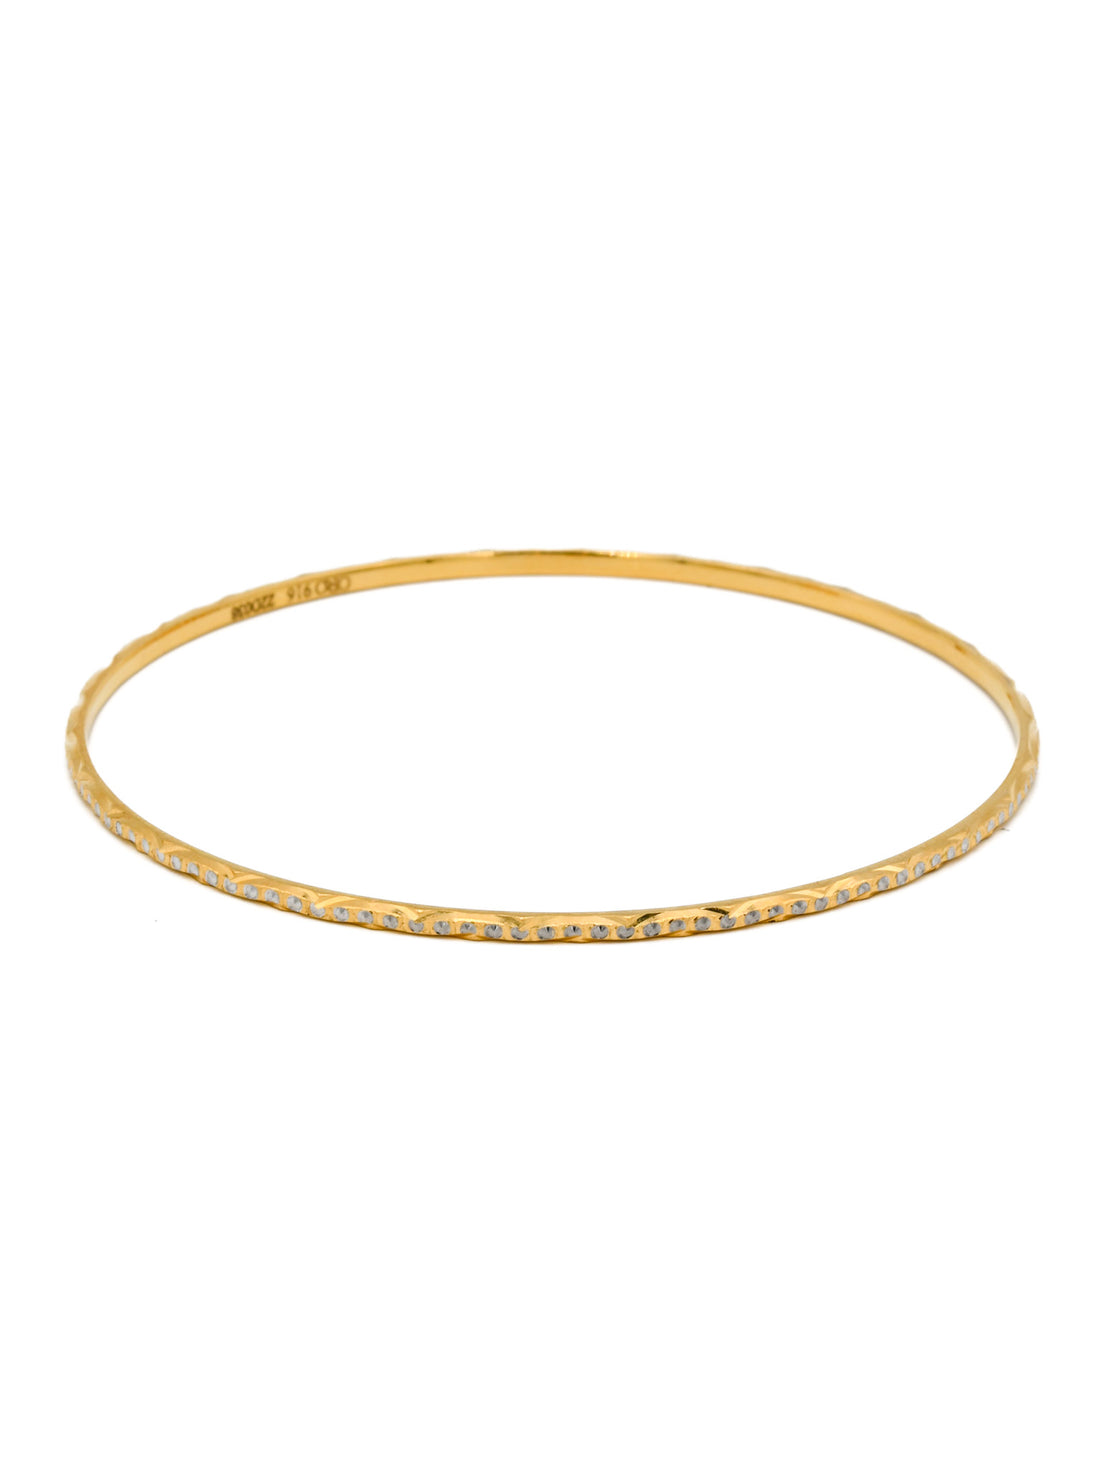 22ct Gold Two Tone 4 Bangles - Roop Darshan